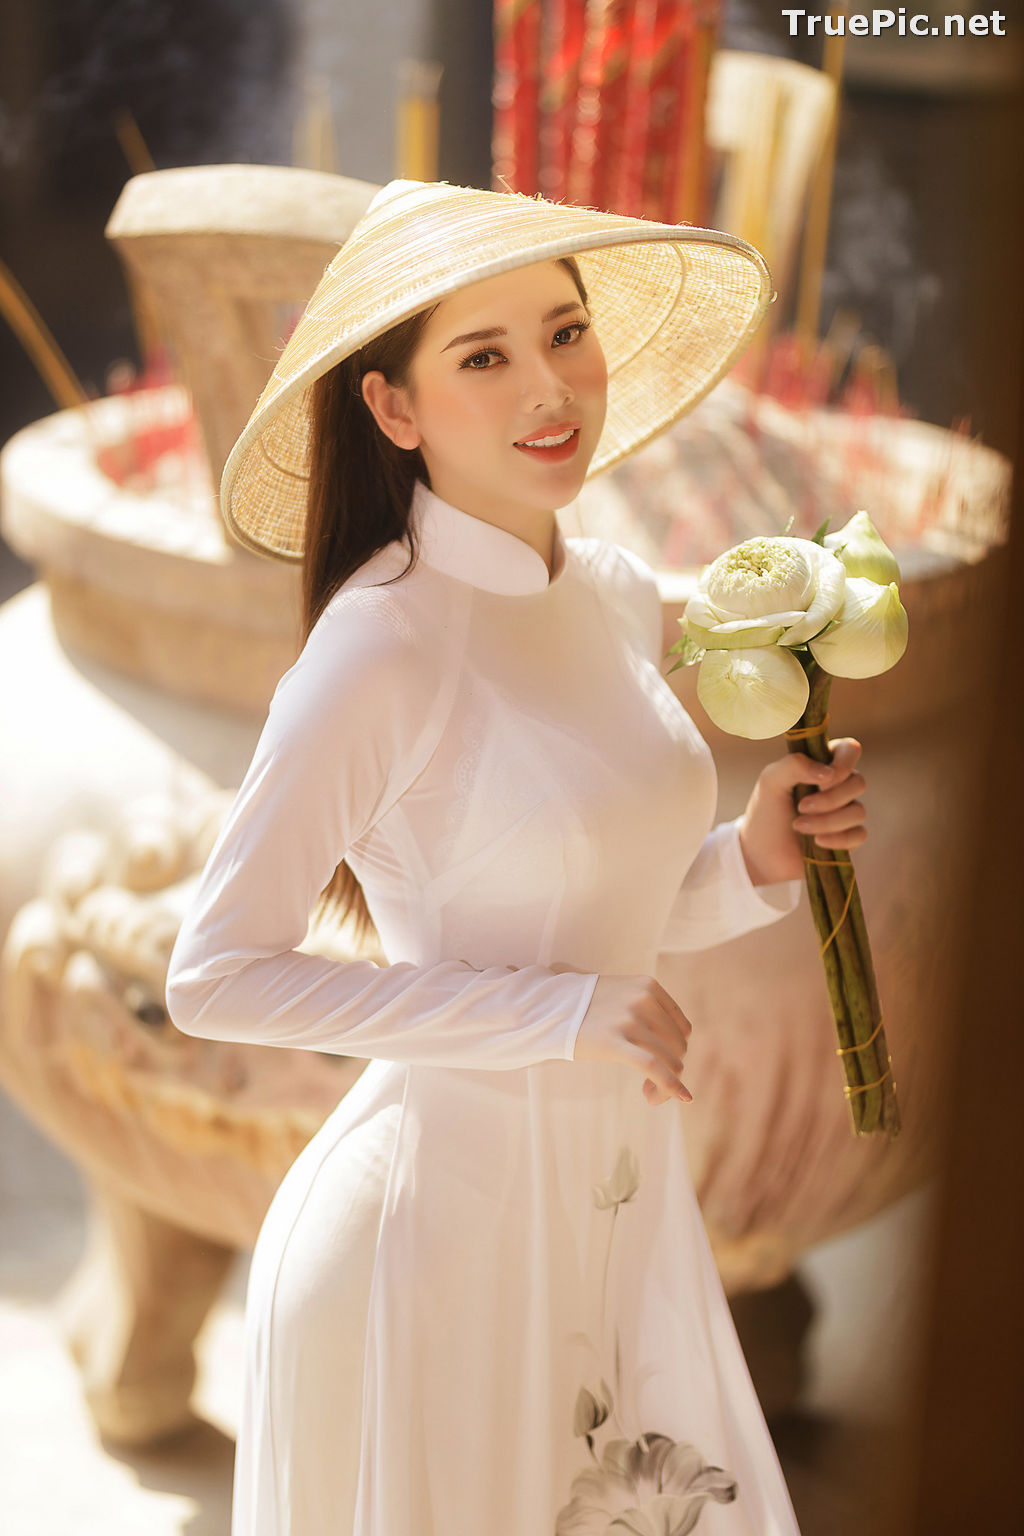 Image The Beauty of Vietnamese Girls with Traditional Dress (Ao Dai) #2 - TruePic.net - Picture-67